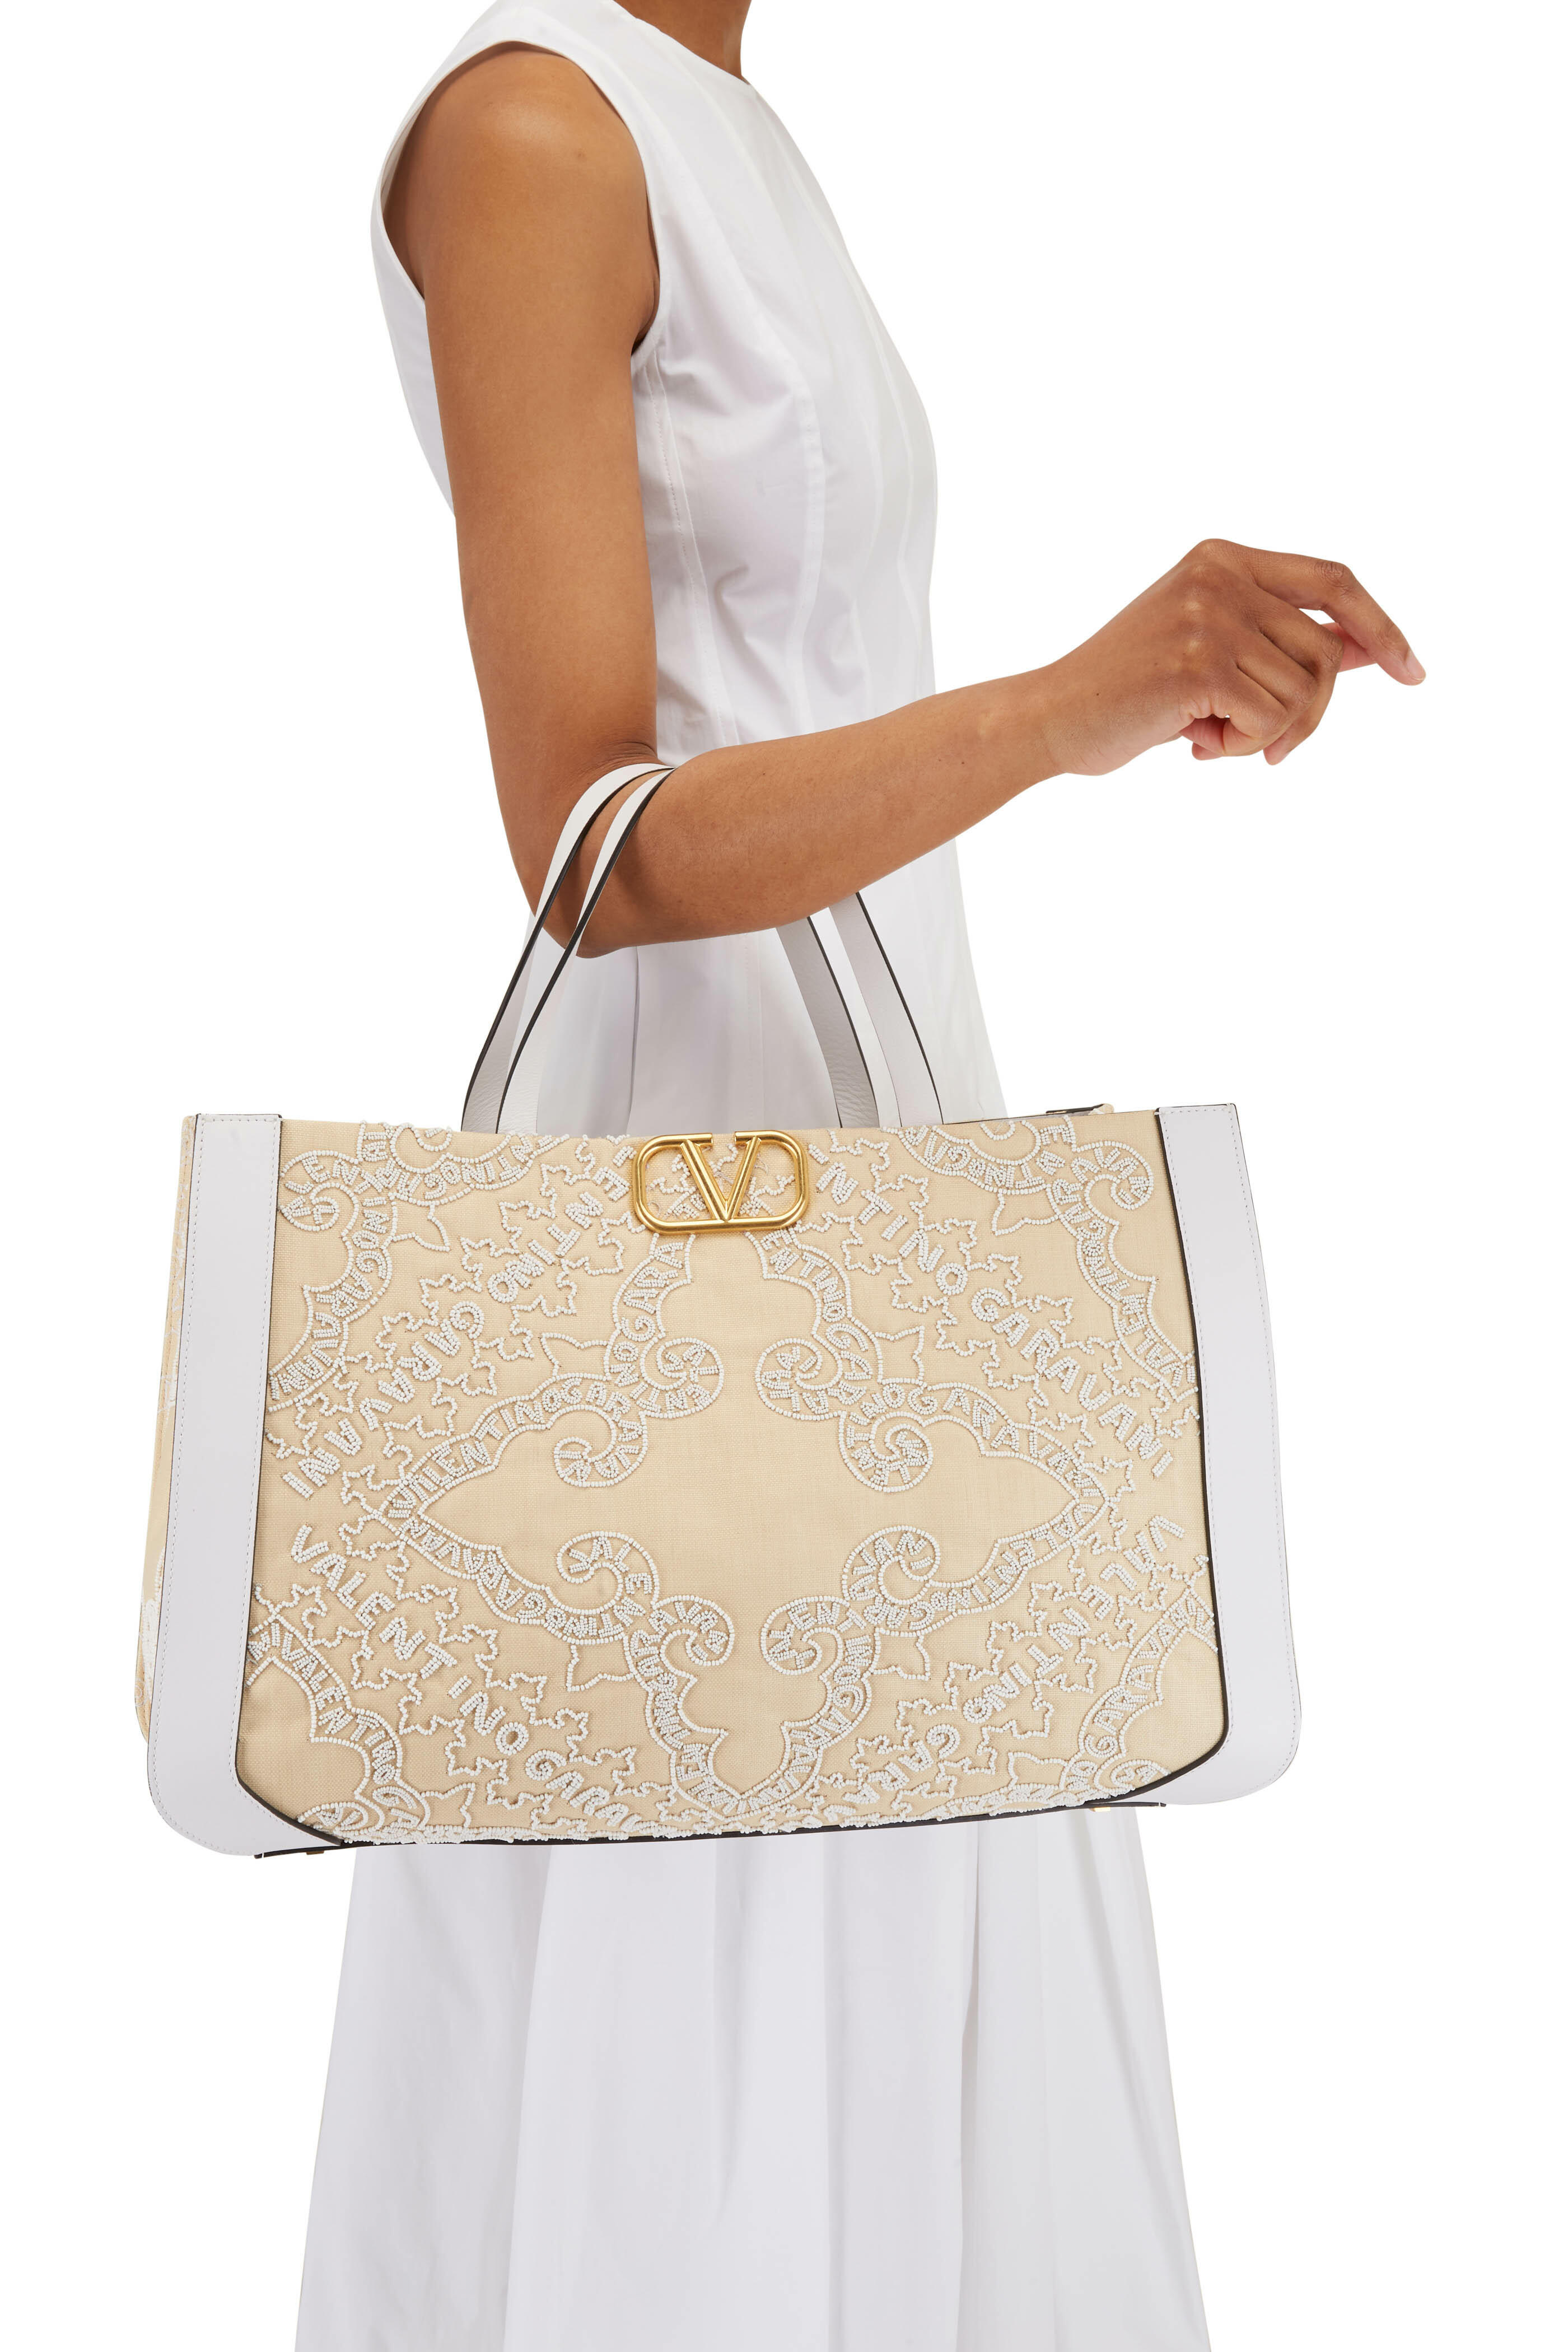 Vlogo Signature Handbag With Raffia Embroidery for Woman in